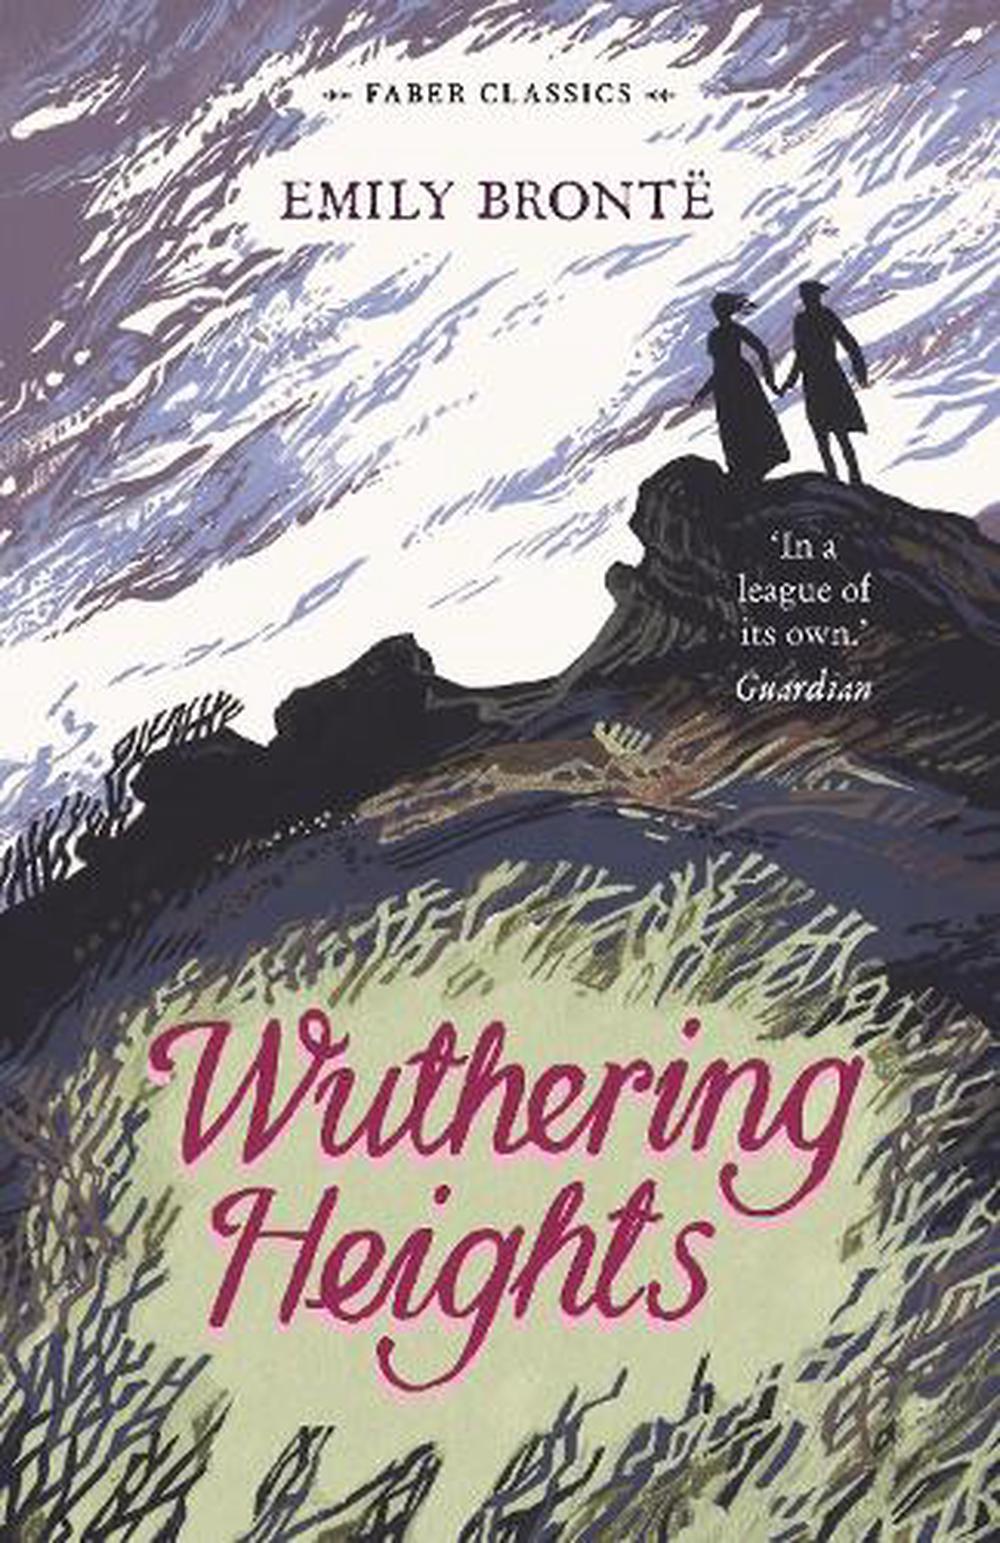 Wuthering Heights by Emily Bronte (English) Paperback Book Free ...